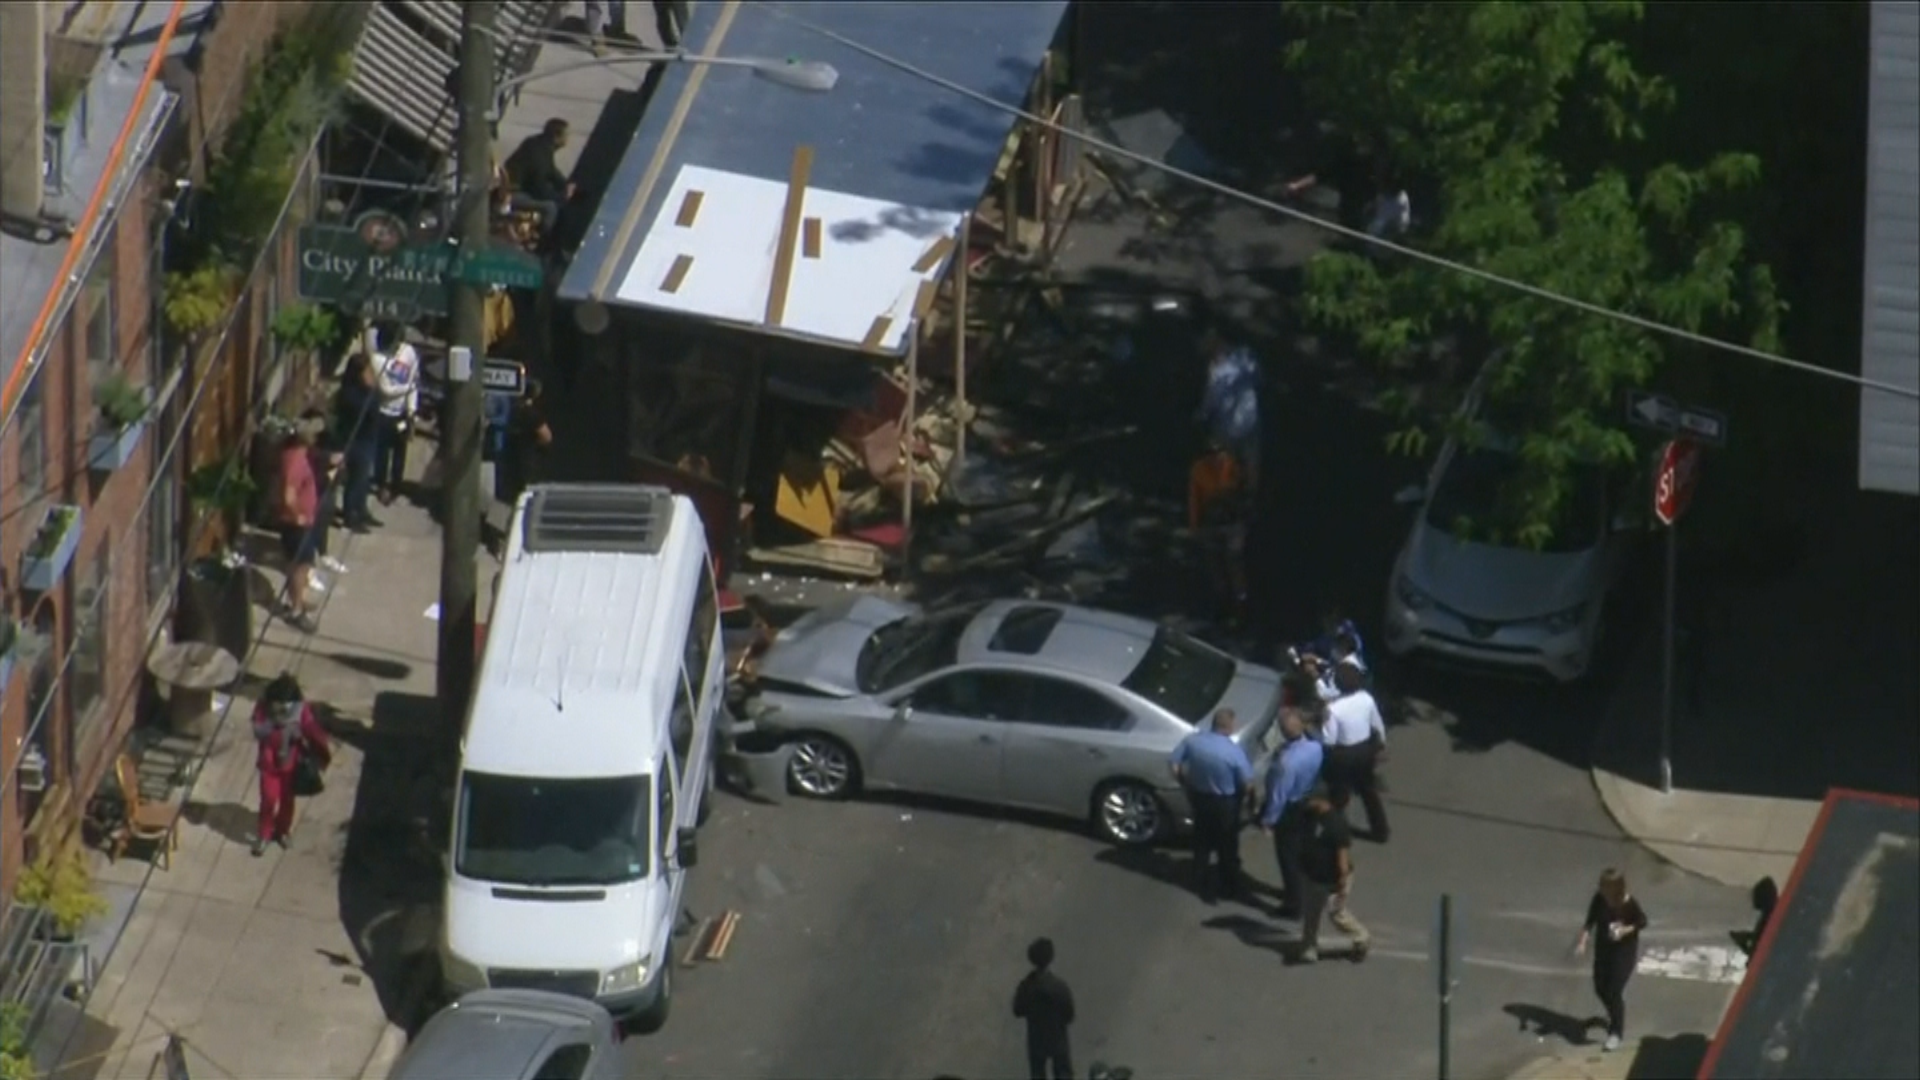 At Least 1 Injured After Vehicle Crashes Into Outdoor Dining Area In Northern Liberties